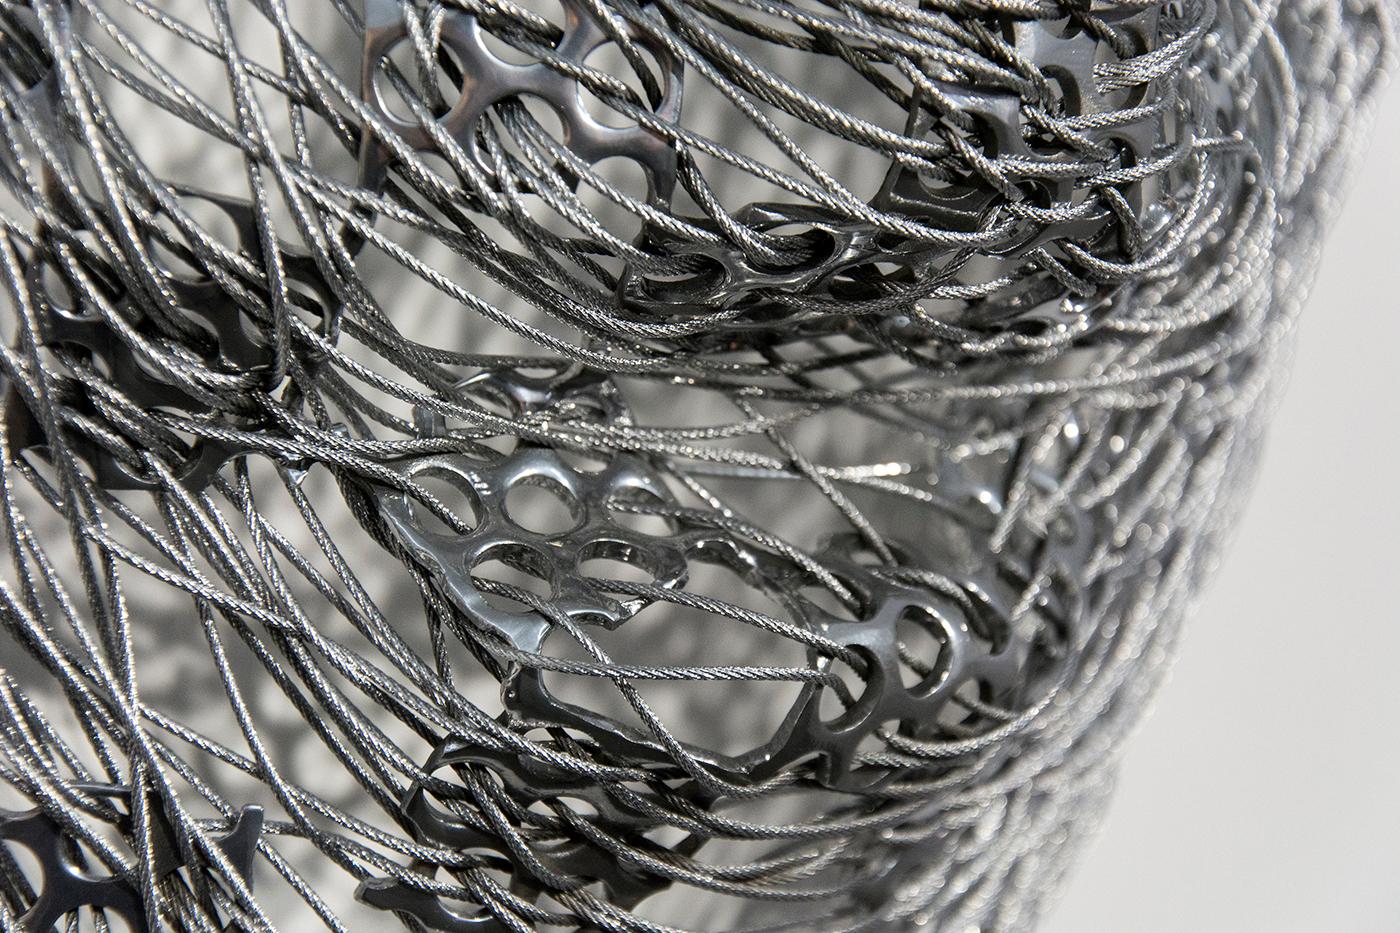 Tangled - silver, abstract human face, stainless steel and cable wall sculpture - Contemporary Sculpture by Dale Dunning